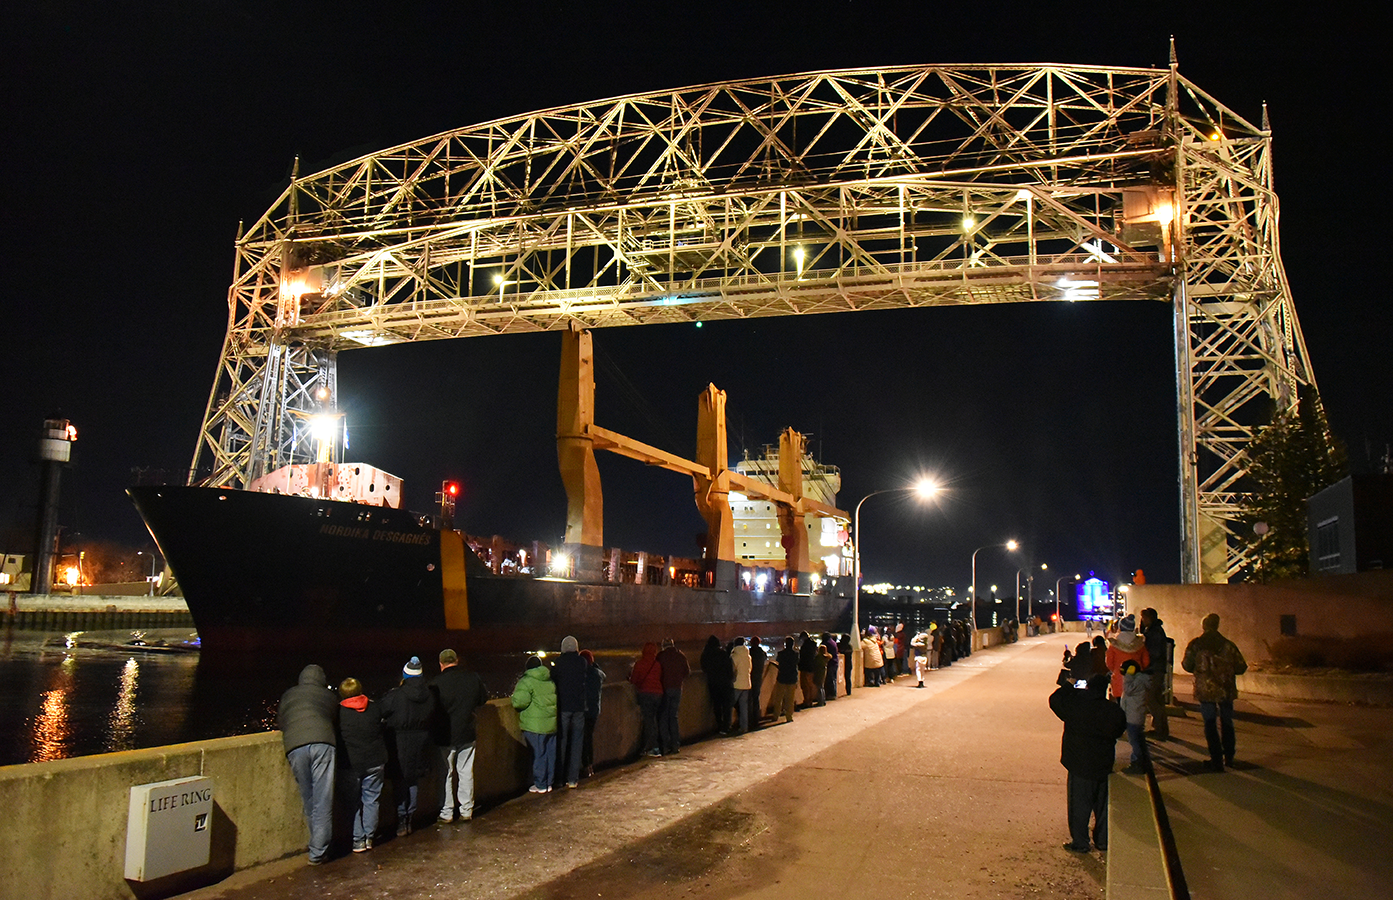 The 𝘕𝘰𝘳𝘥𝘪𝘬𝘢 𝘋𝘦𝘴𝘨𝘢𝘨𝘯𝘦𝘴 departs Duluth on Dec. 29, 2023. Photo by Gus Schauer.